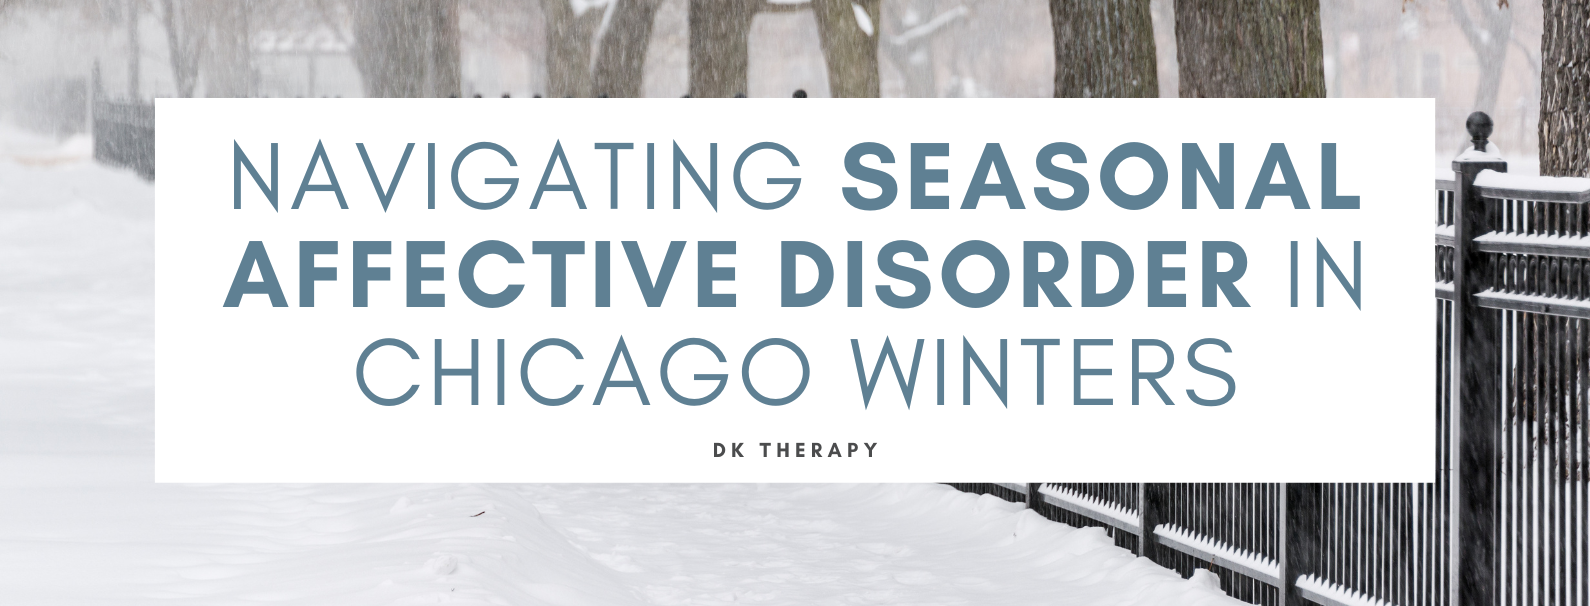 Navigating Seasonal Affective Disorder in Chicago Winters